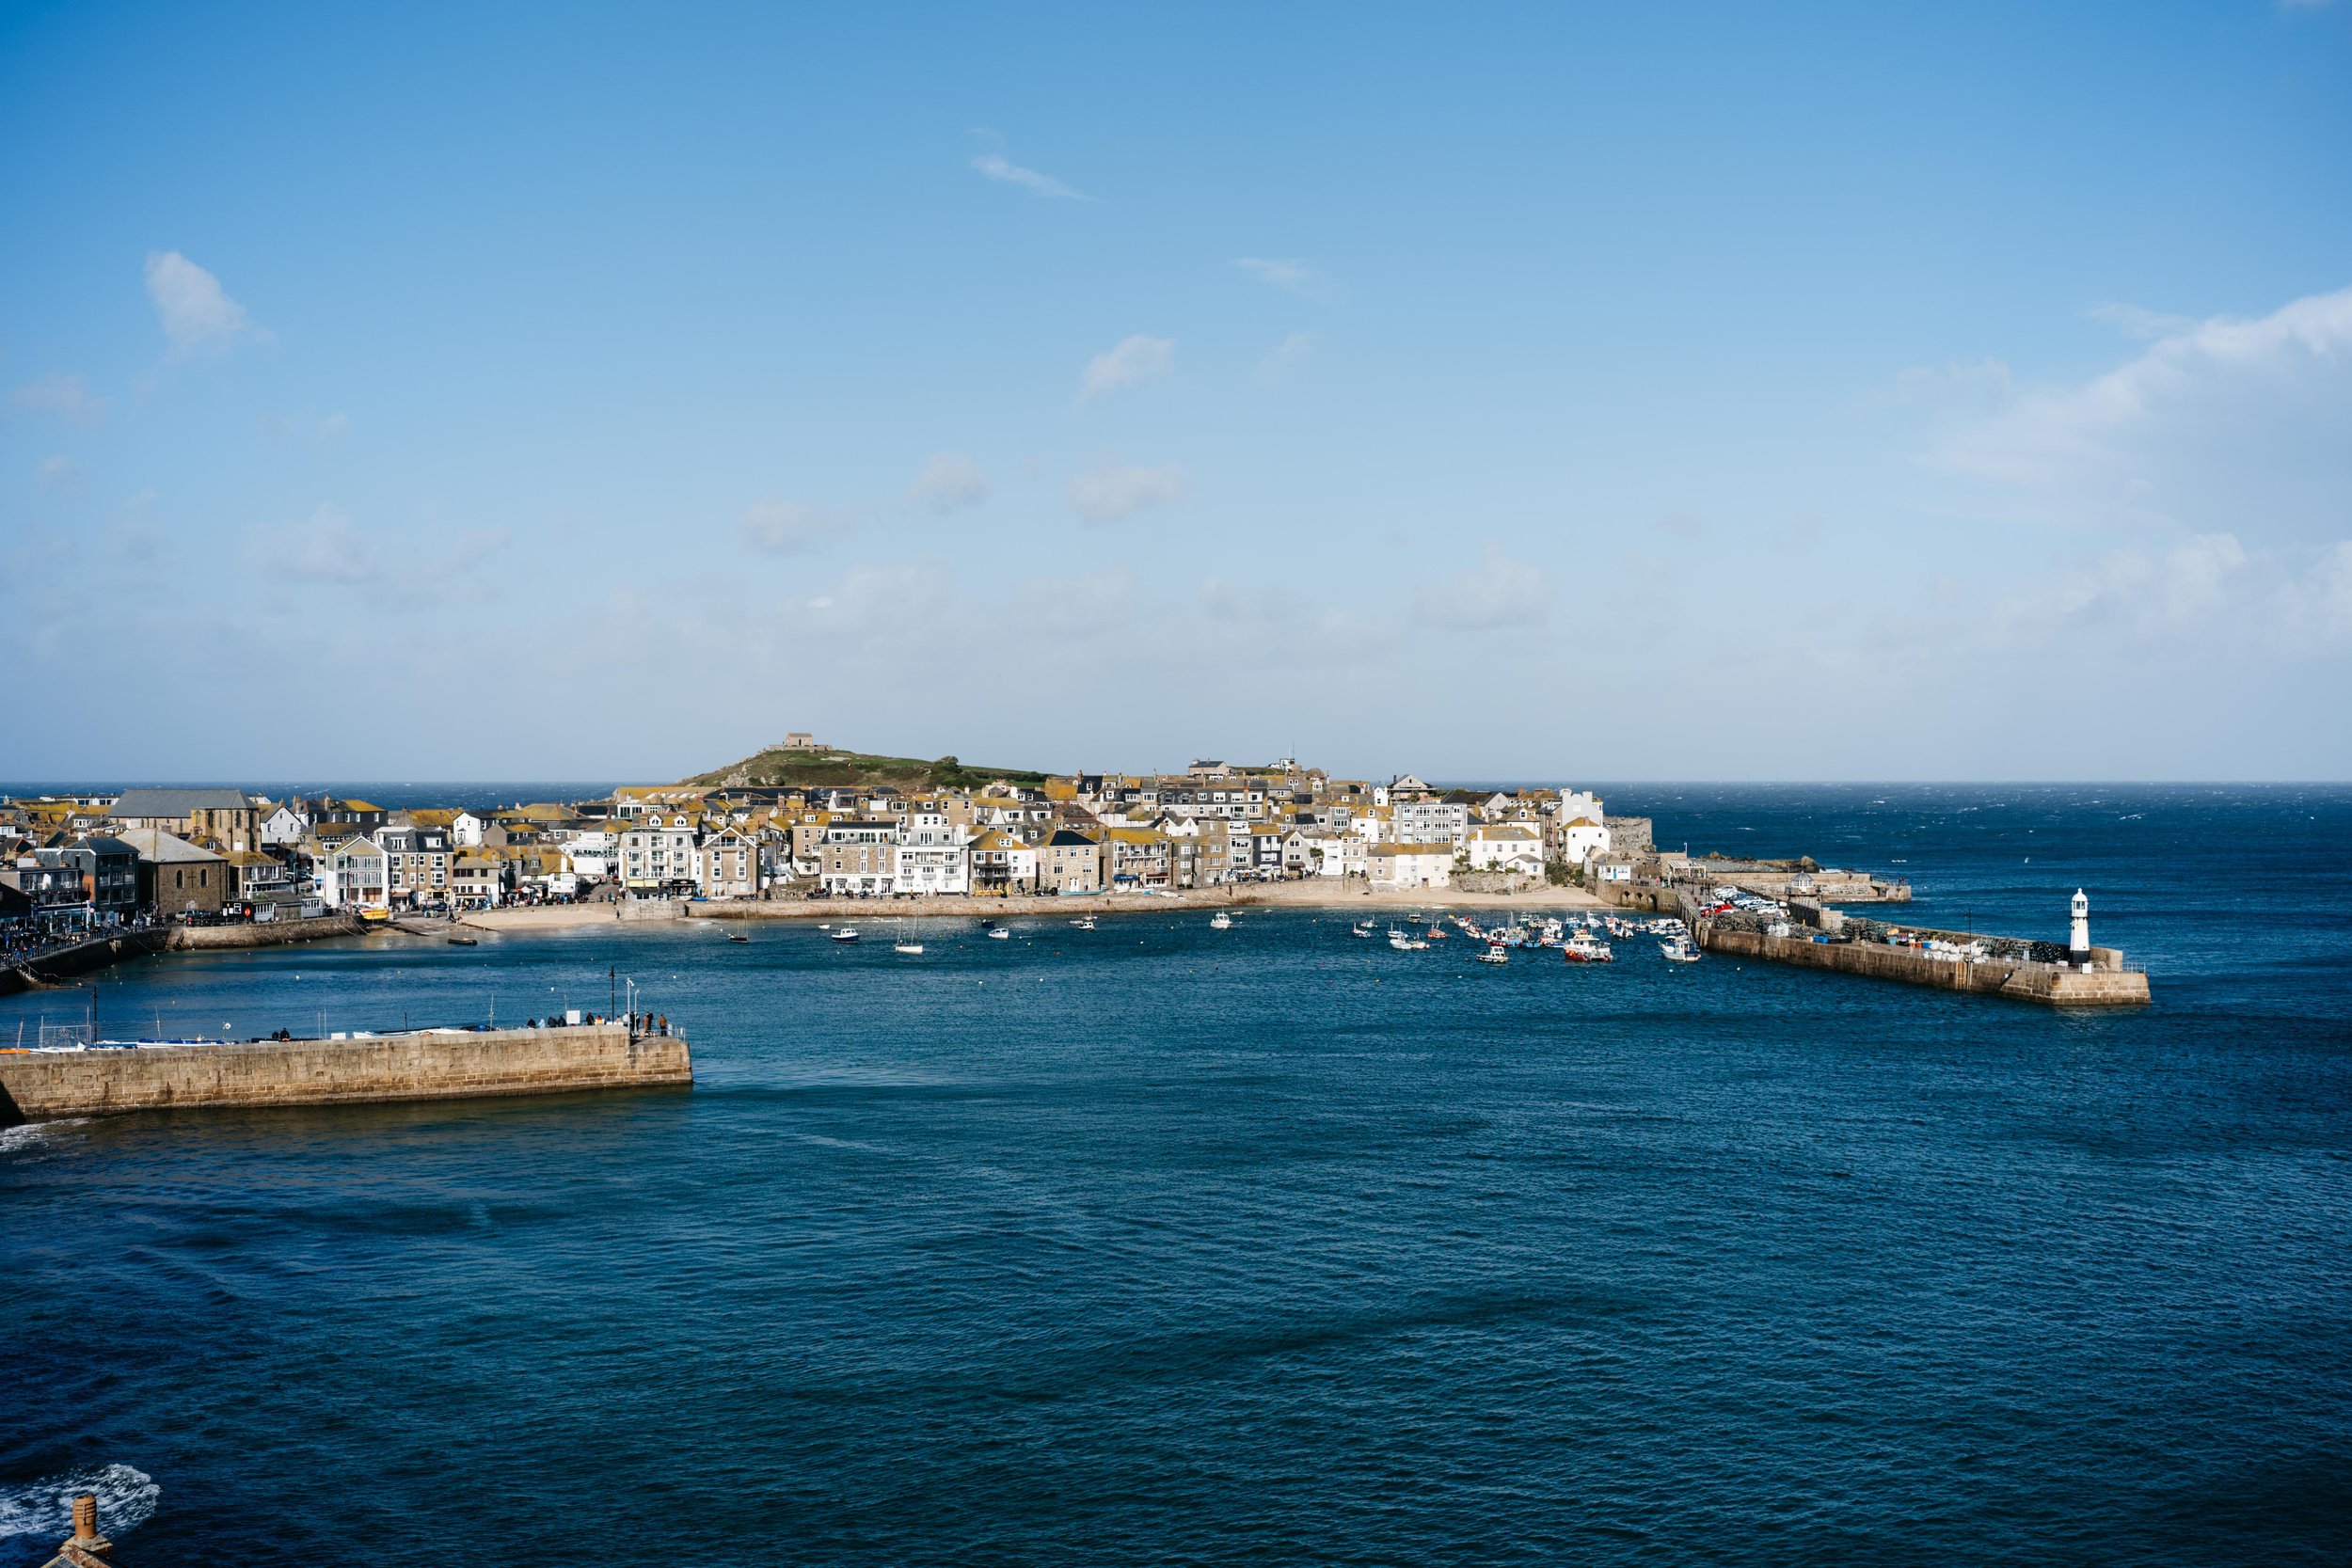  The harbour town of St Ives. The town has long been a magnet for artists and is home to the Tate St Ives which houses artworks by both local masters and international artists. 